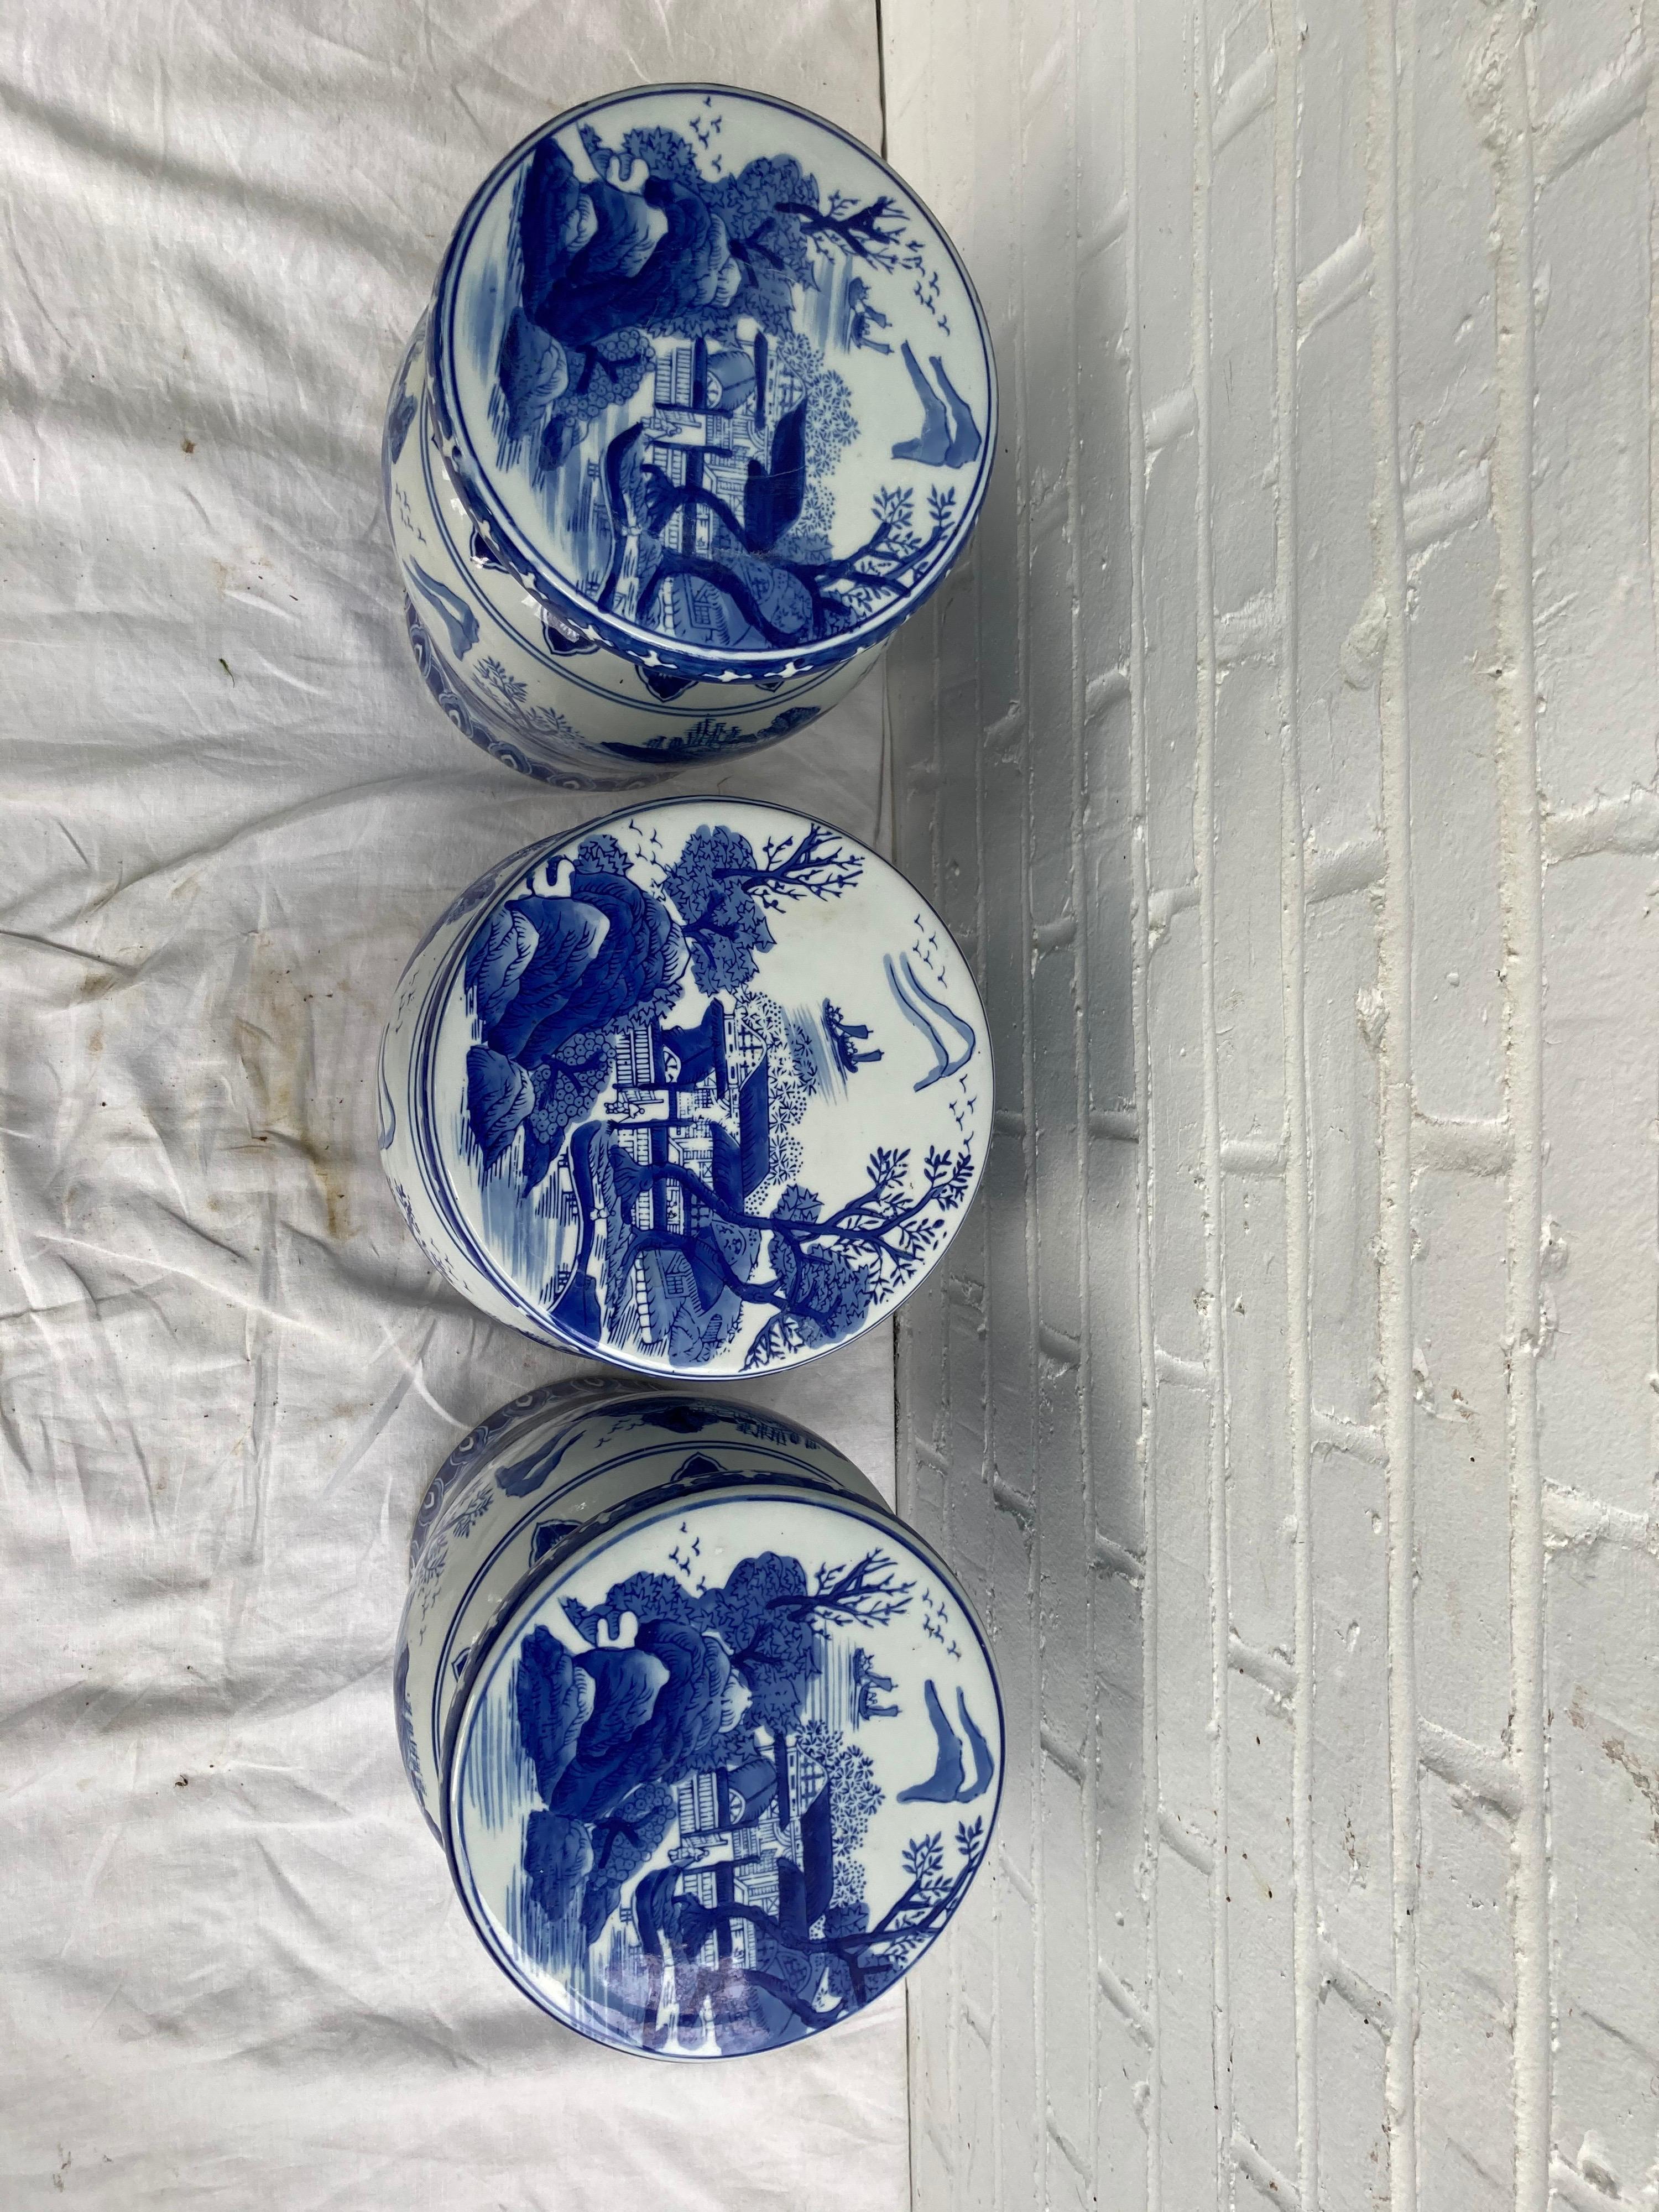 Set of 3 Chinese blue and white garden stools sold separately or together...